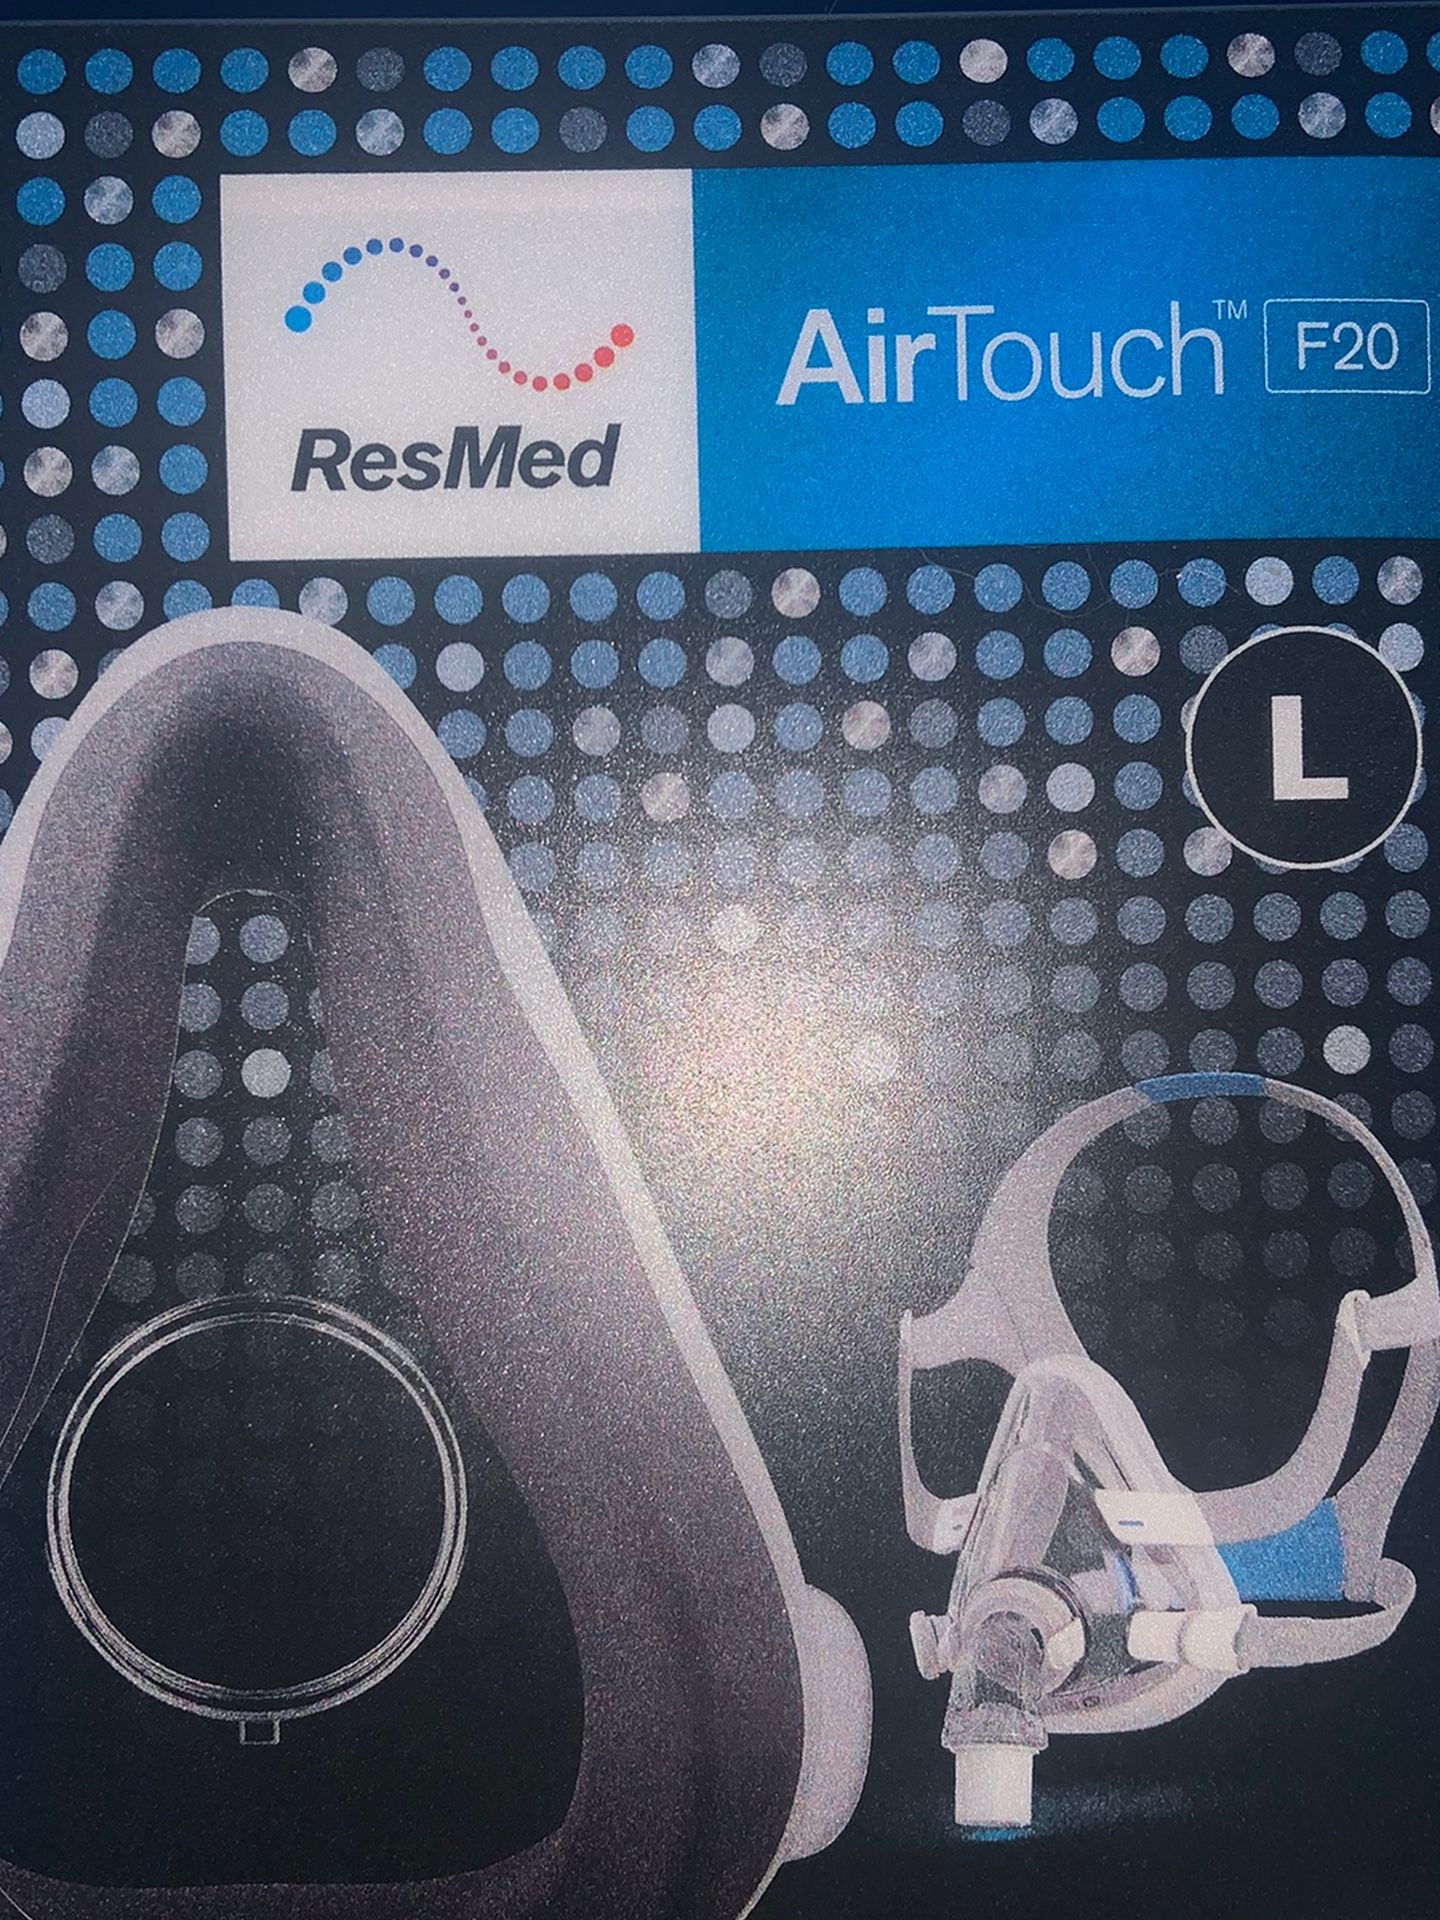 NEW... ResMed AIRTOUCH F20 MASK KIT... LARGE